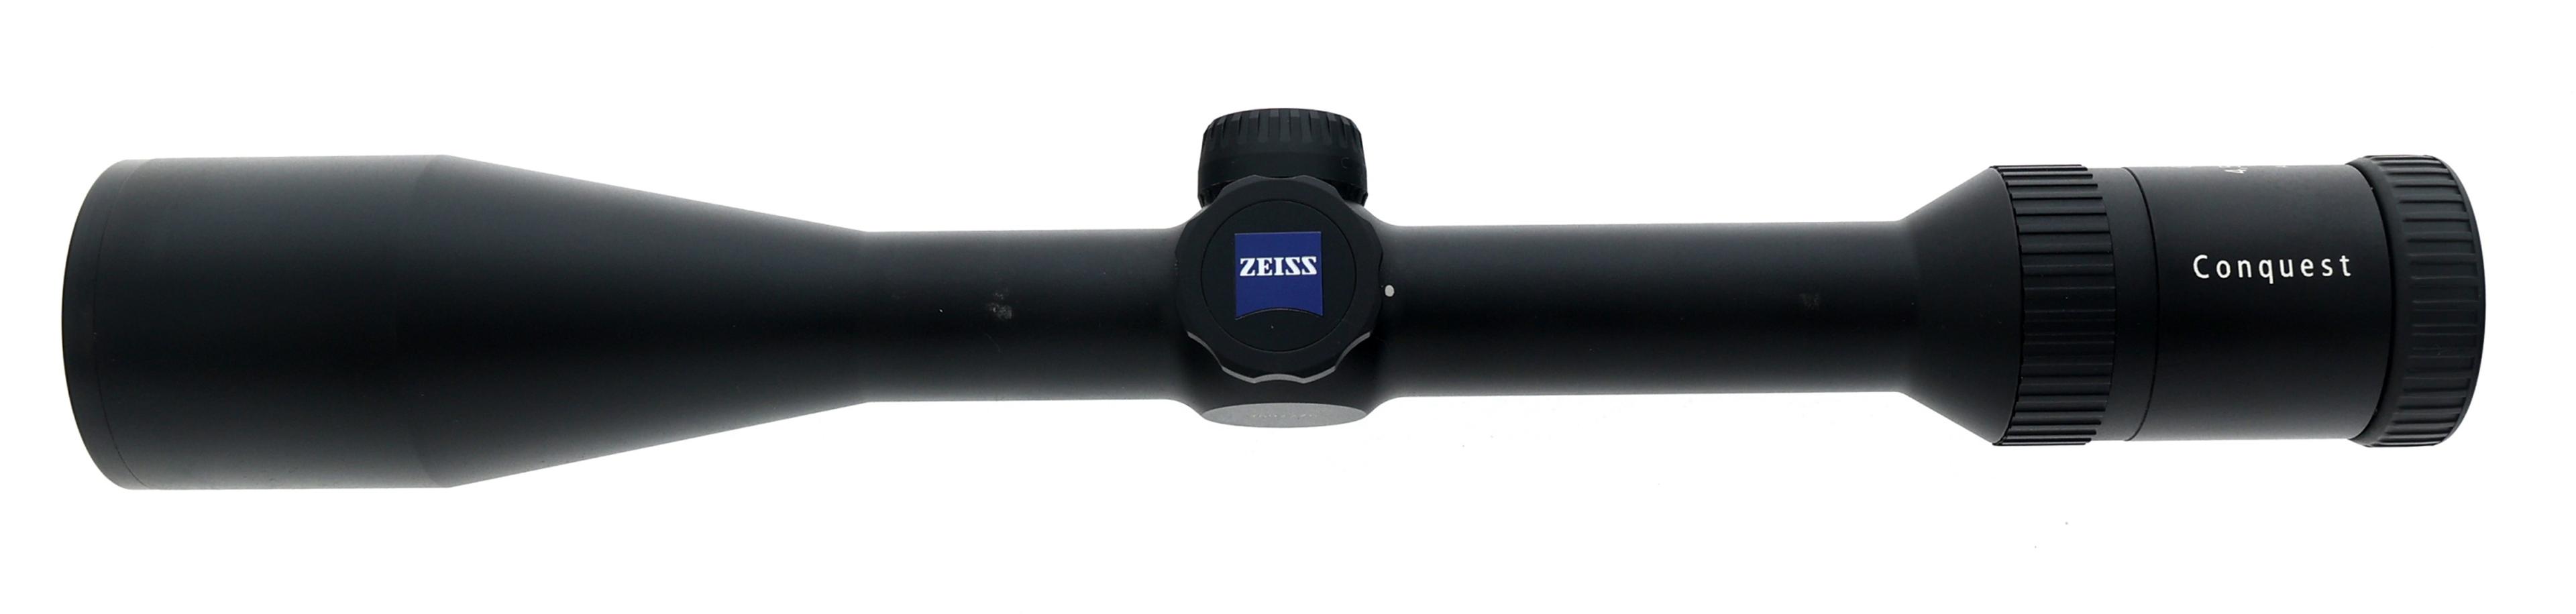 CARL ZEISS CONQUEST 4.5-14x44mm RIFLE SCOPE